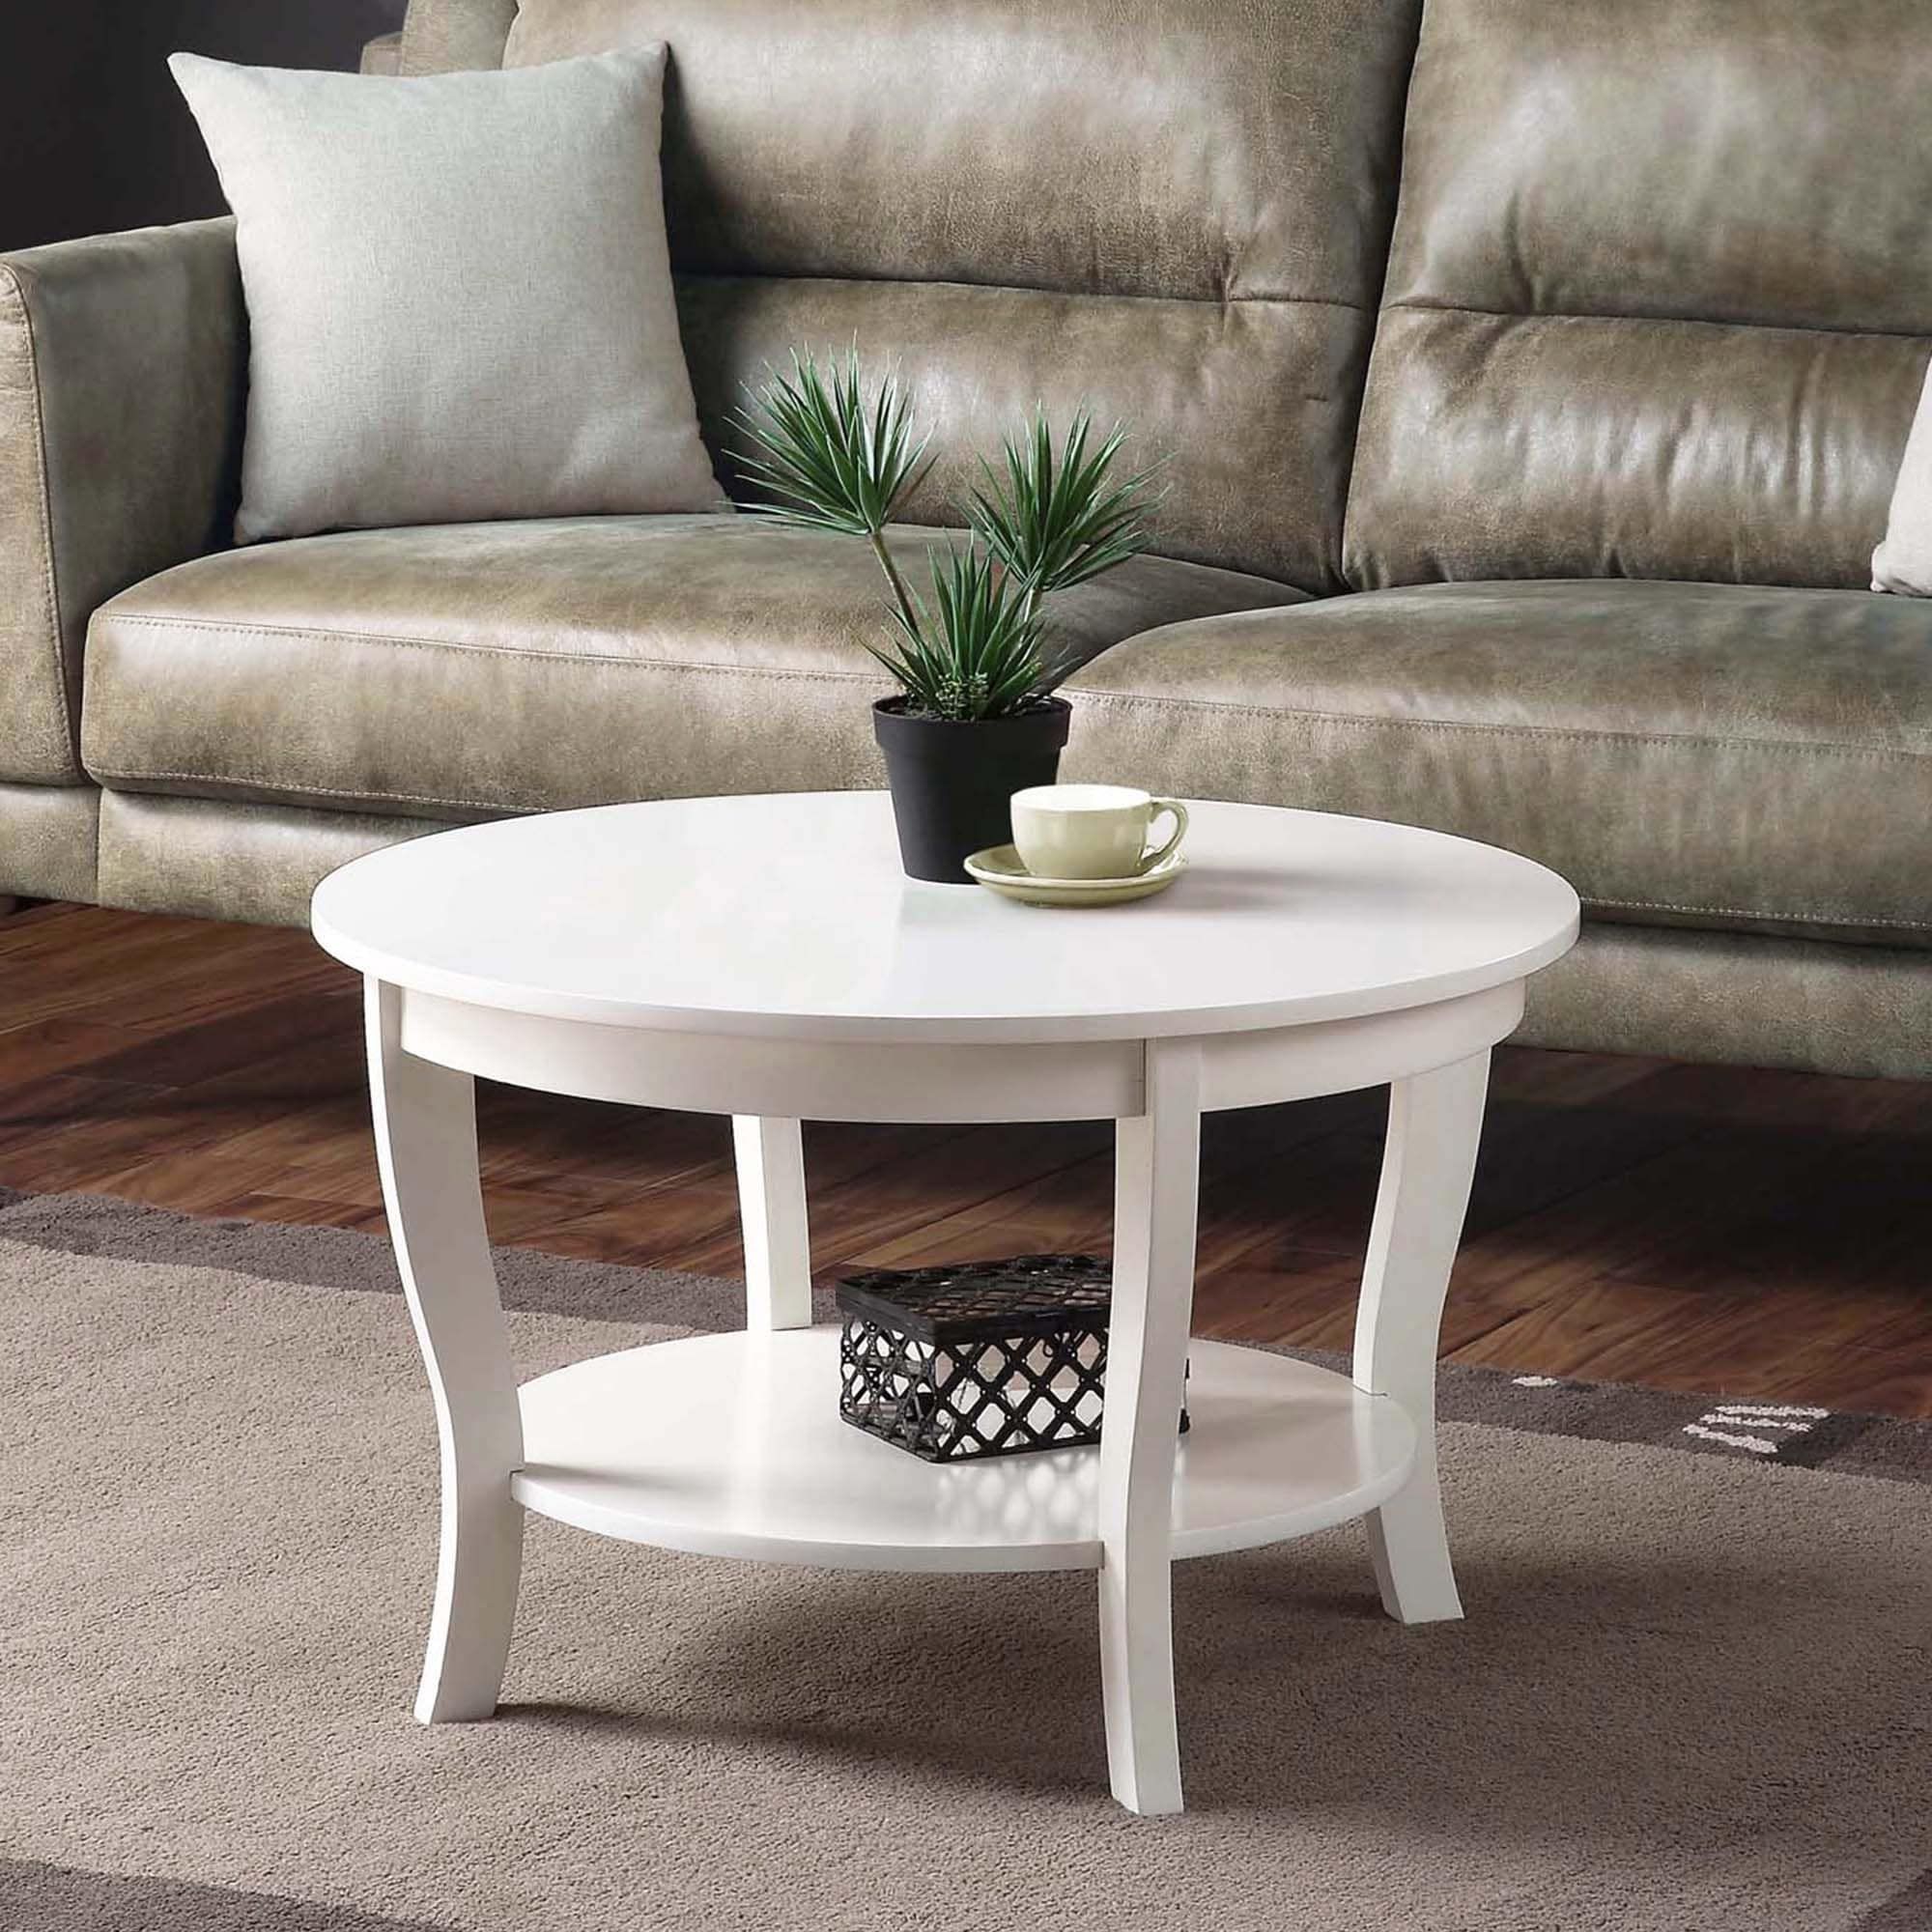 2019 Convenience Concepts American Heritage Round Coffee Table With Shelf – On  Sale – Bed Bath & Beyond – 28860374 In American Heritage Round Coffee Tables (View 10 of 10)